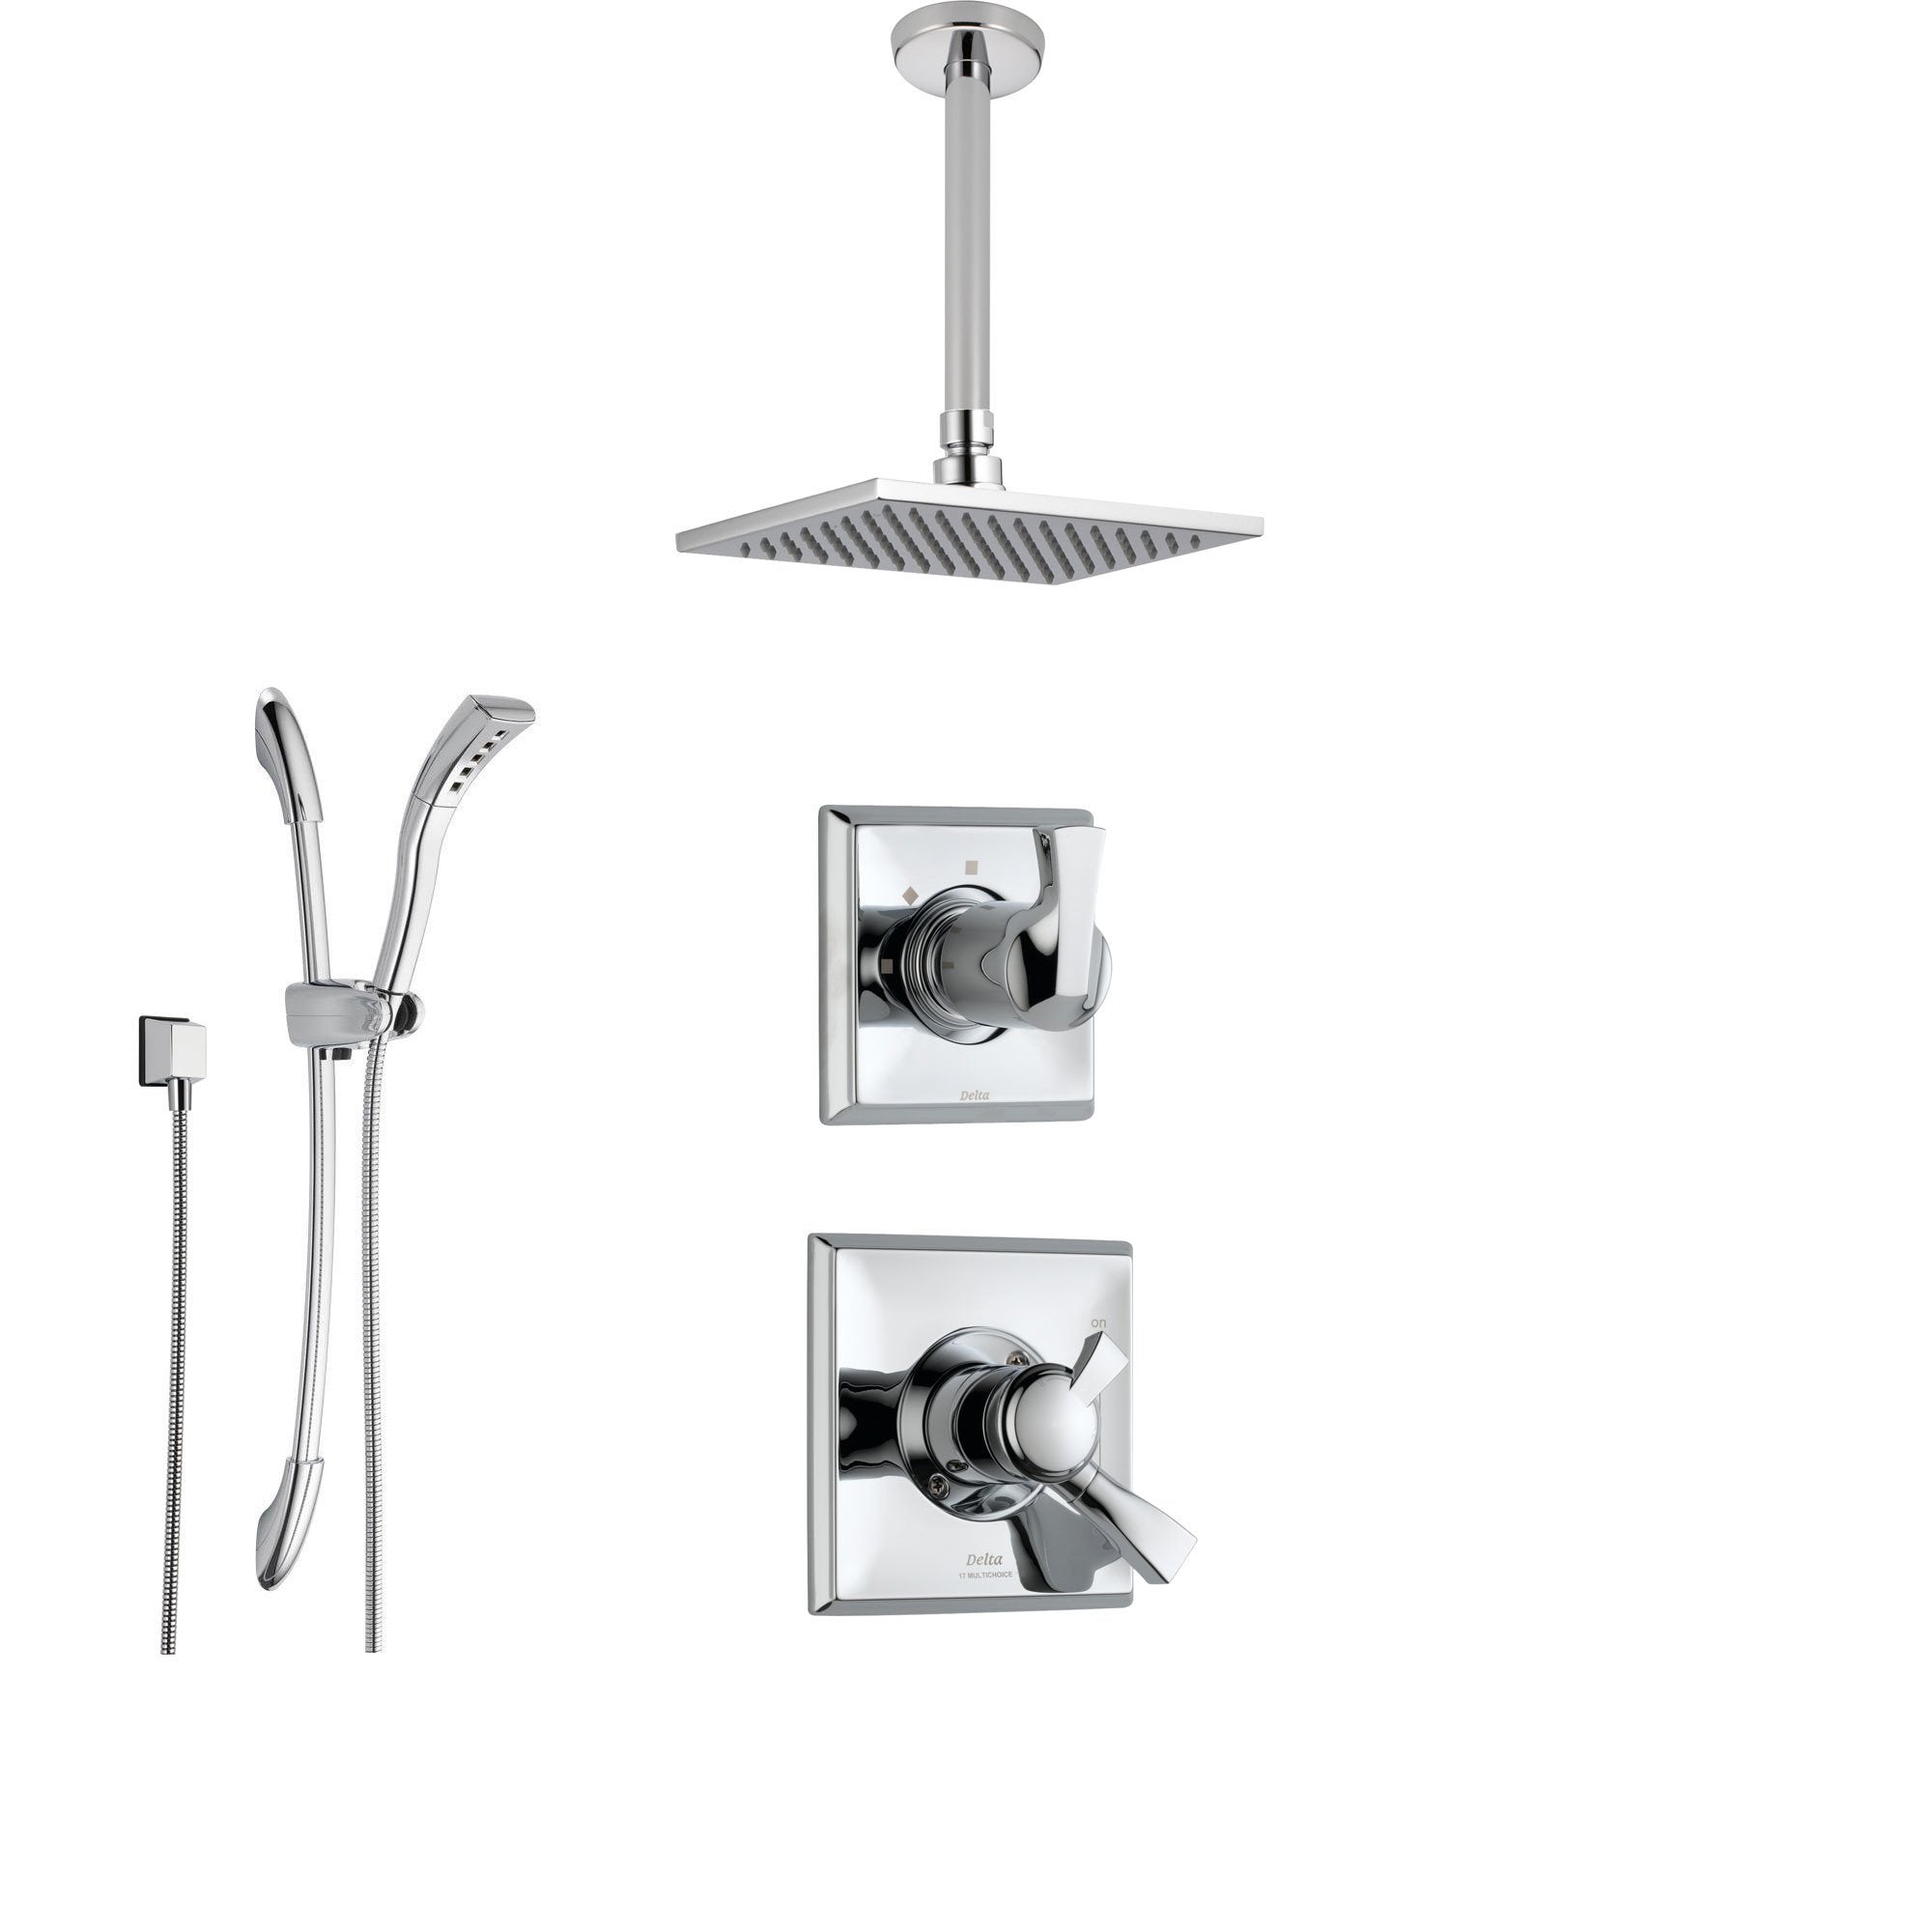 Delta Dryden Chrome Shower System with Dual Control Shower Handle, 3-setting Diverter, Modern Square Ceiling Mount Showerhead, and Hand Shower Spray SS175182